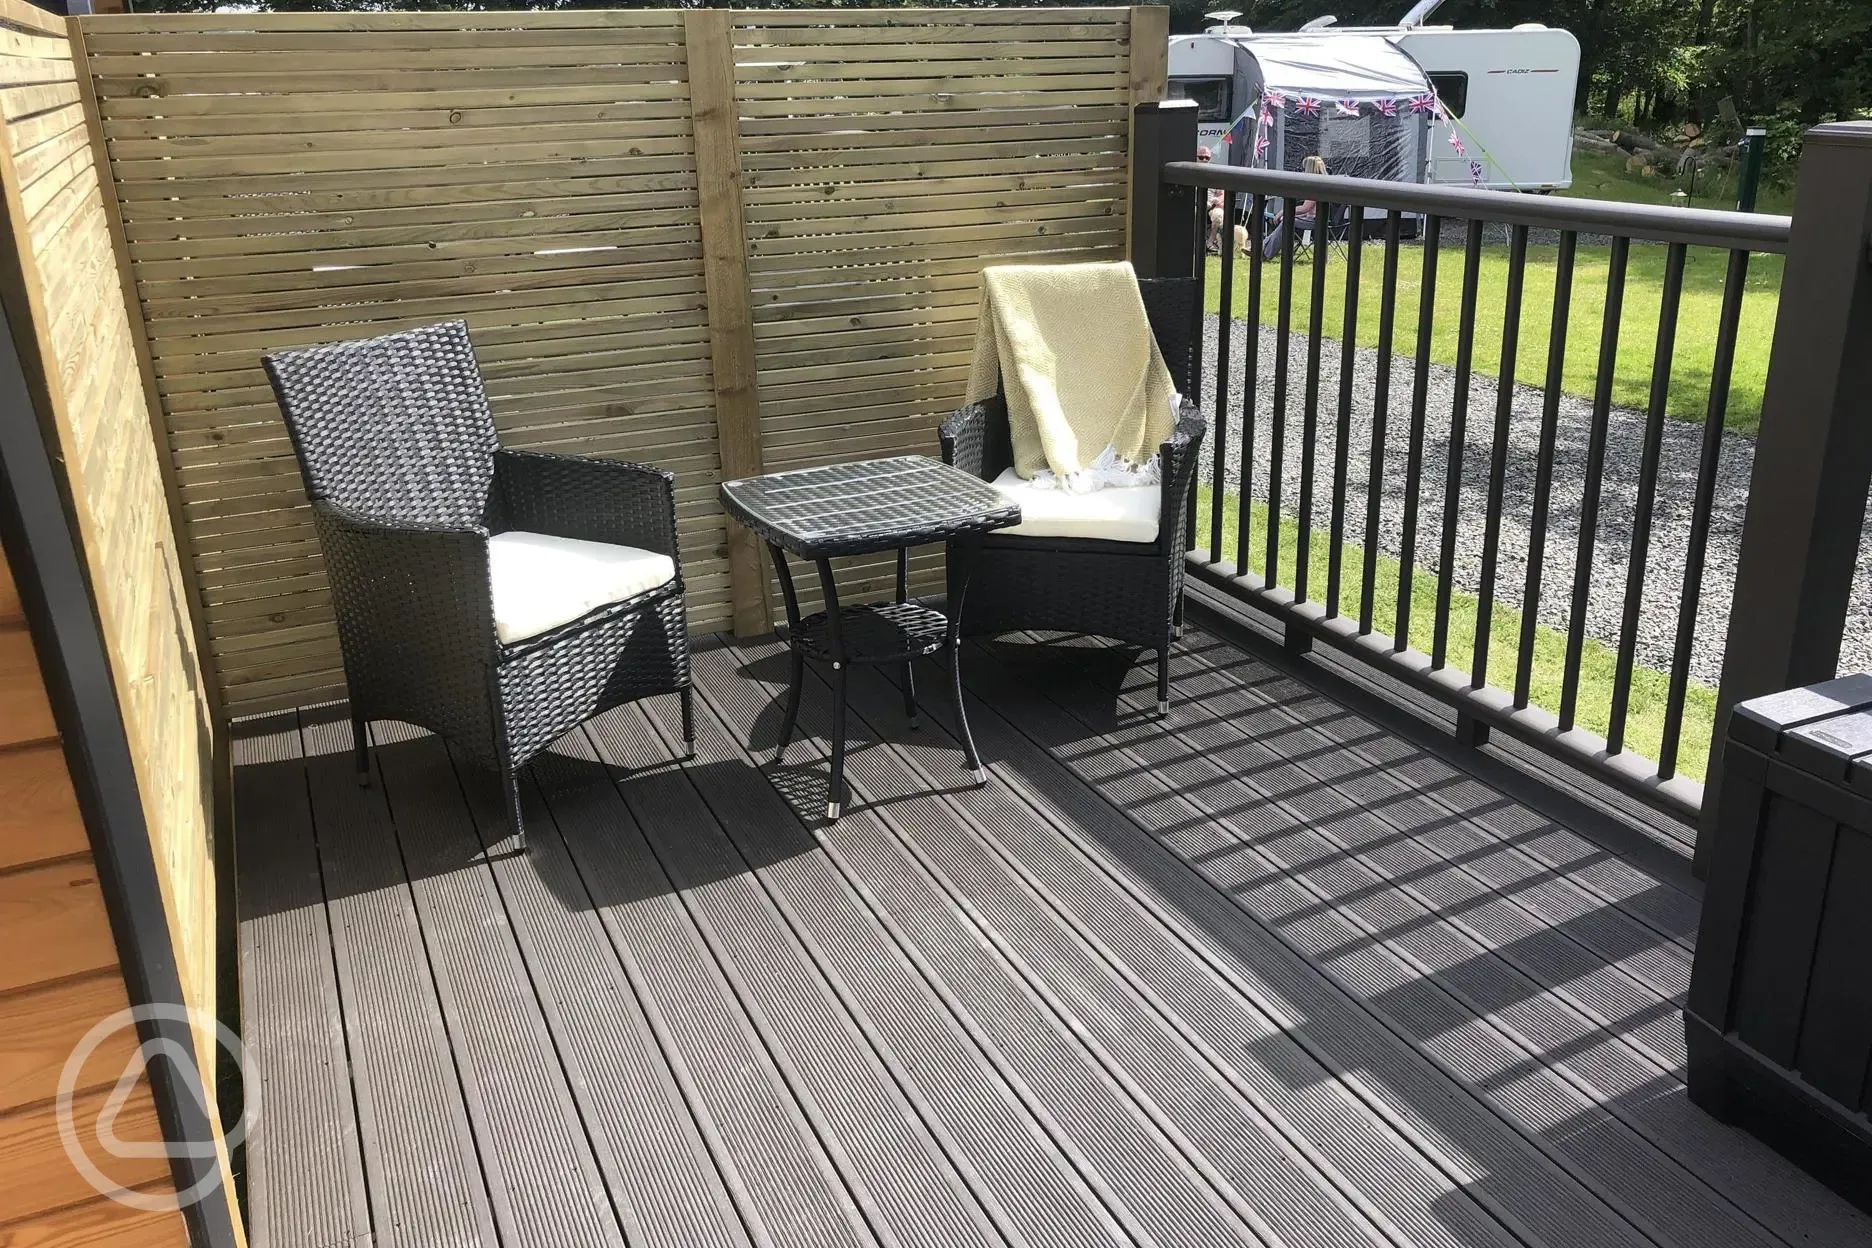 Seating area on Decking